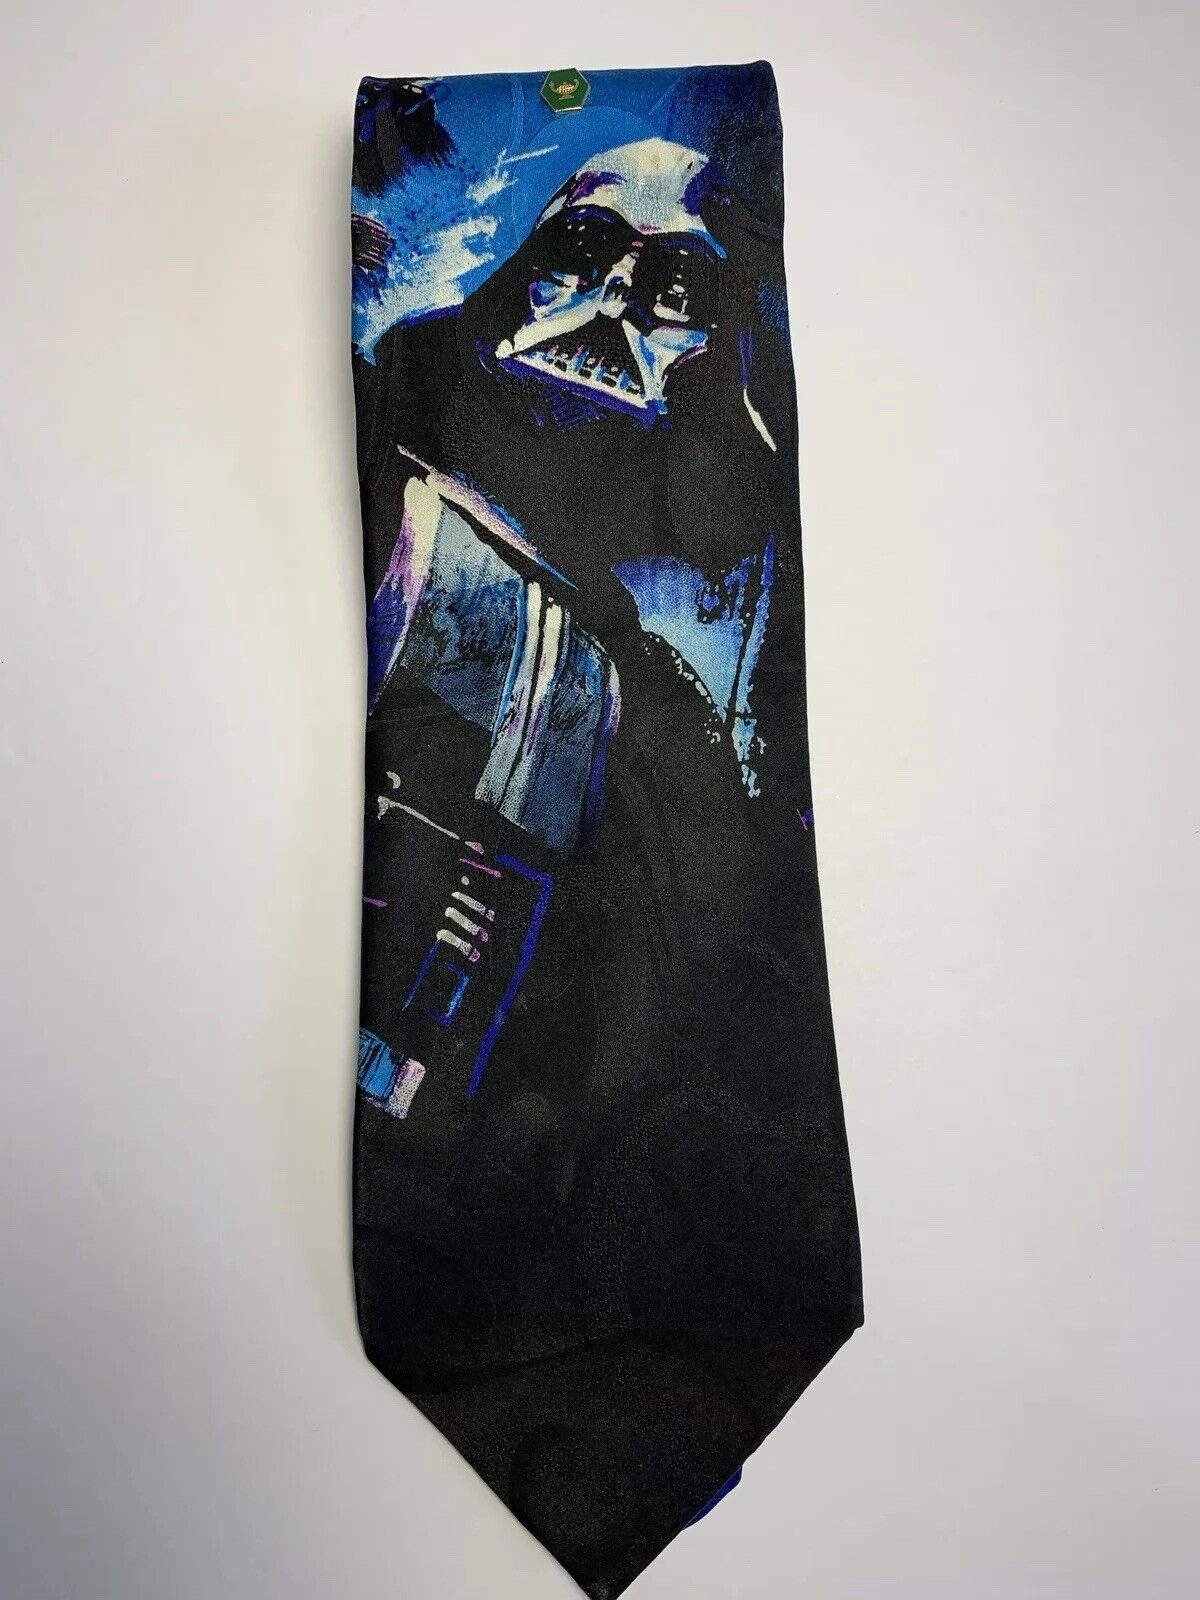 RM Style, Vintage, Star Wars Lord Vader, Men’s Necktie, Imported Fabric -25